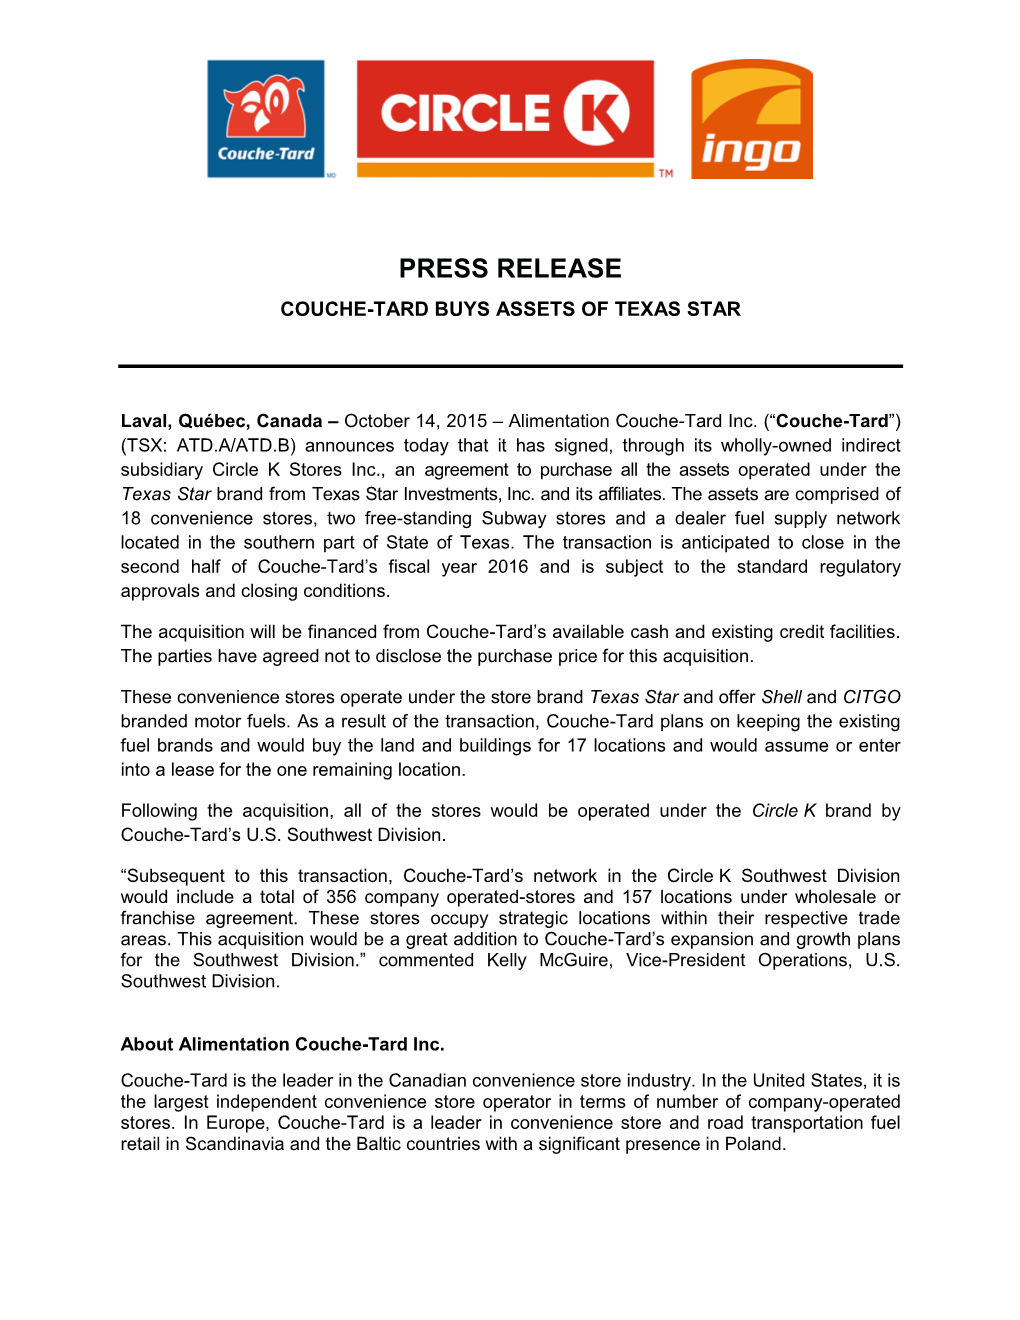 Press Release Couche-Tard Buys Assets of Texas Star